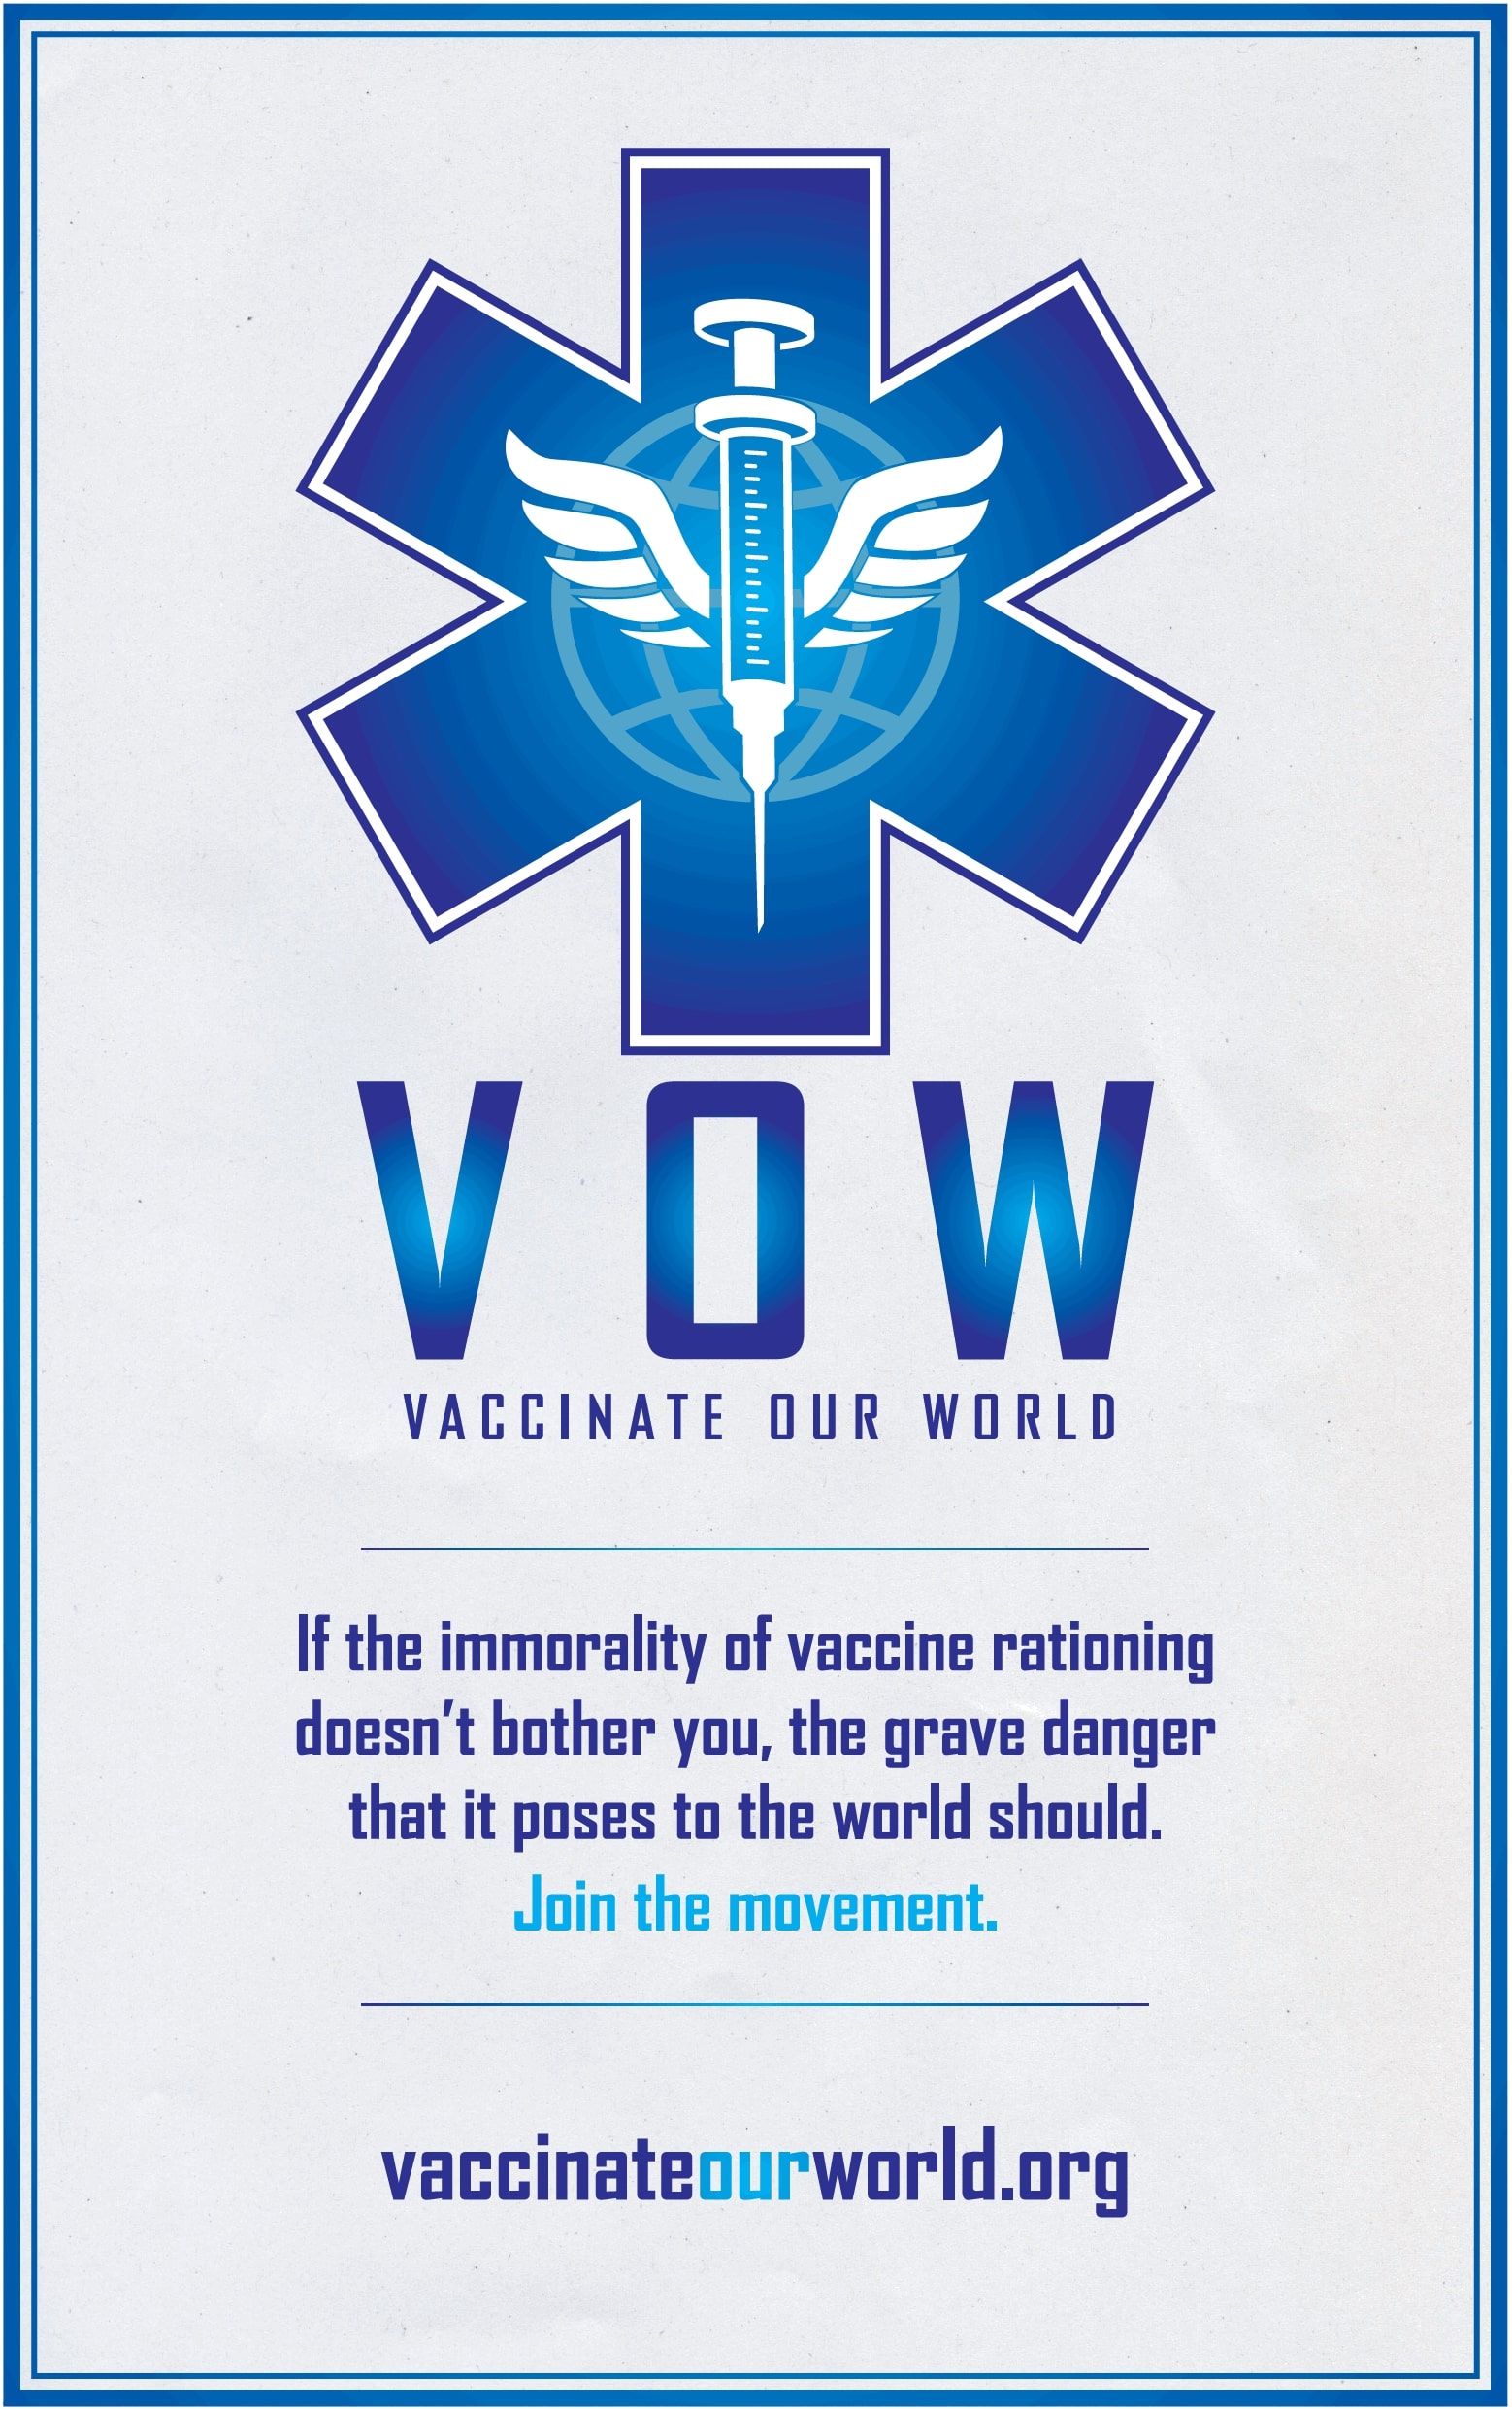 vaccinateourworld-org-vow-vaccinate-our-world-ad-times-of-india-delhi-28-05-2021